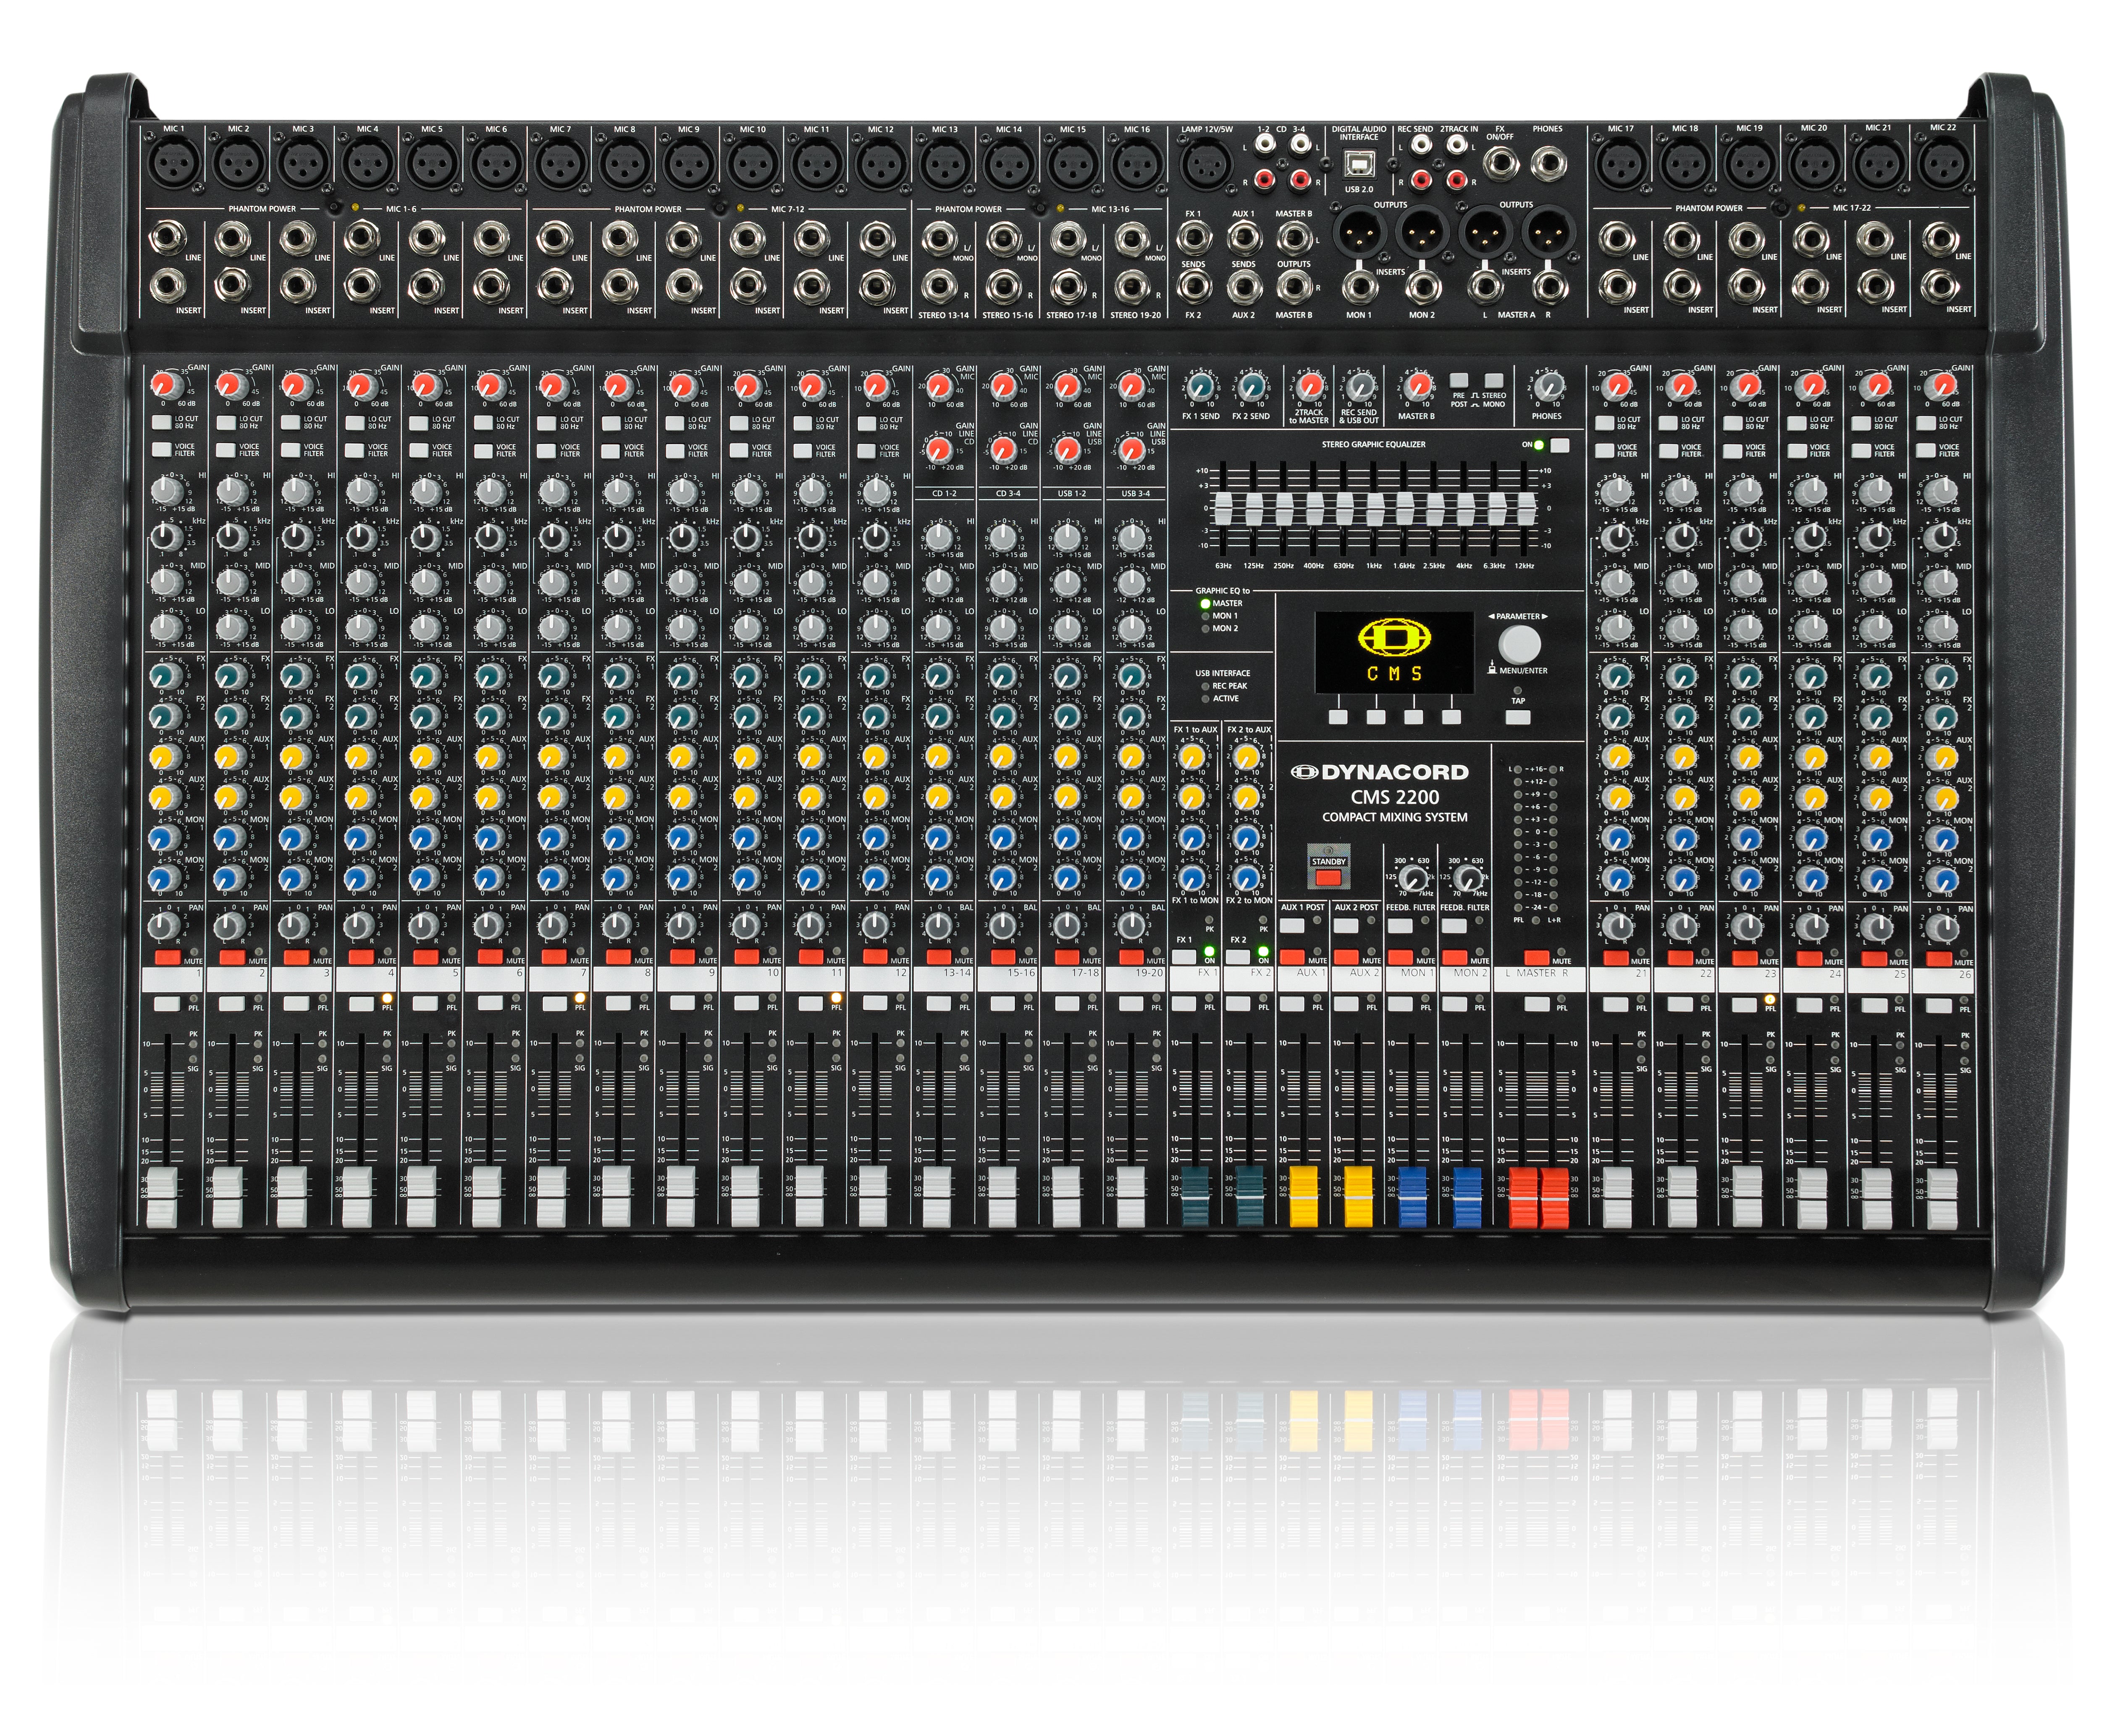 Dynacord CMS 2200-3 22-channel mixer